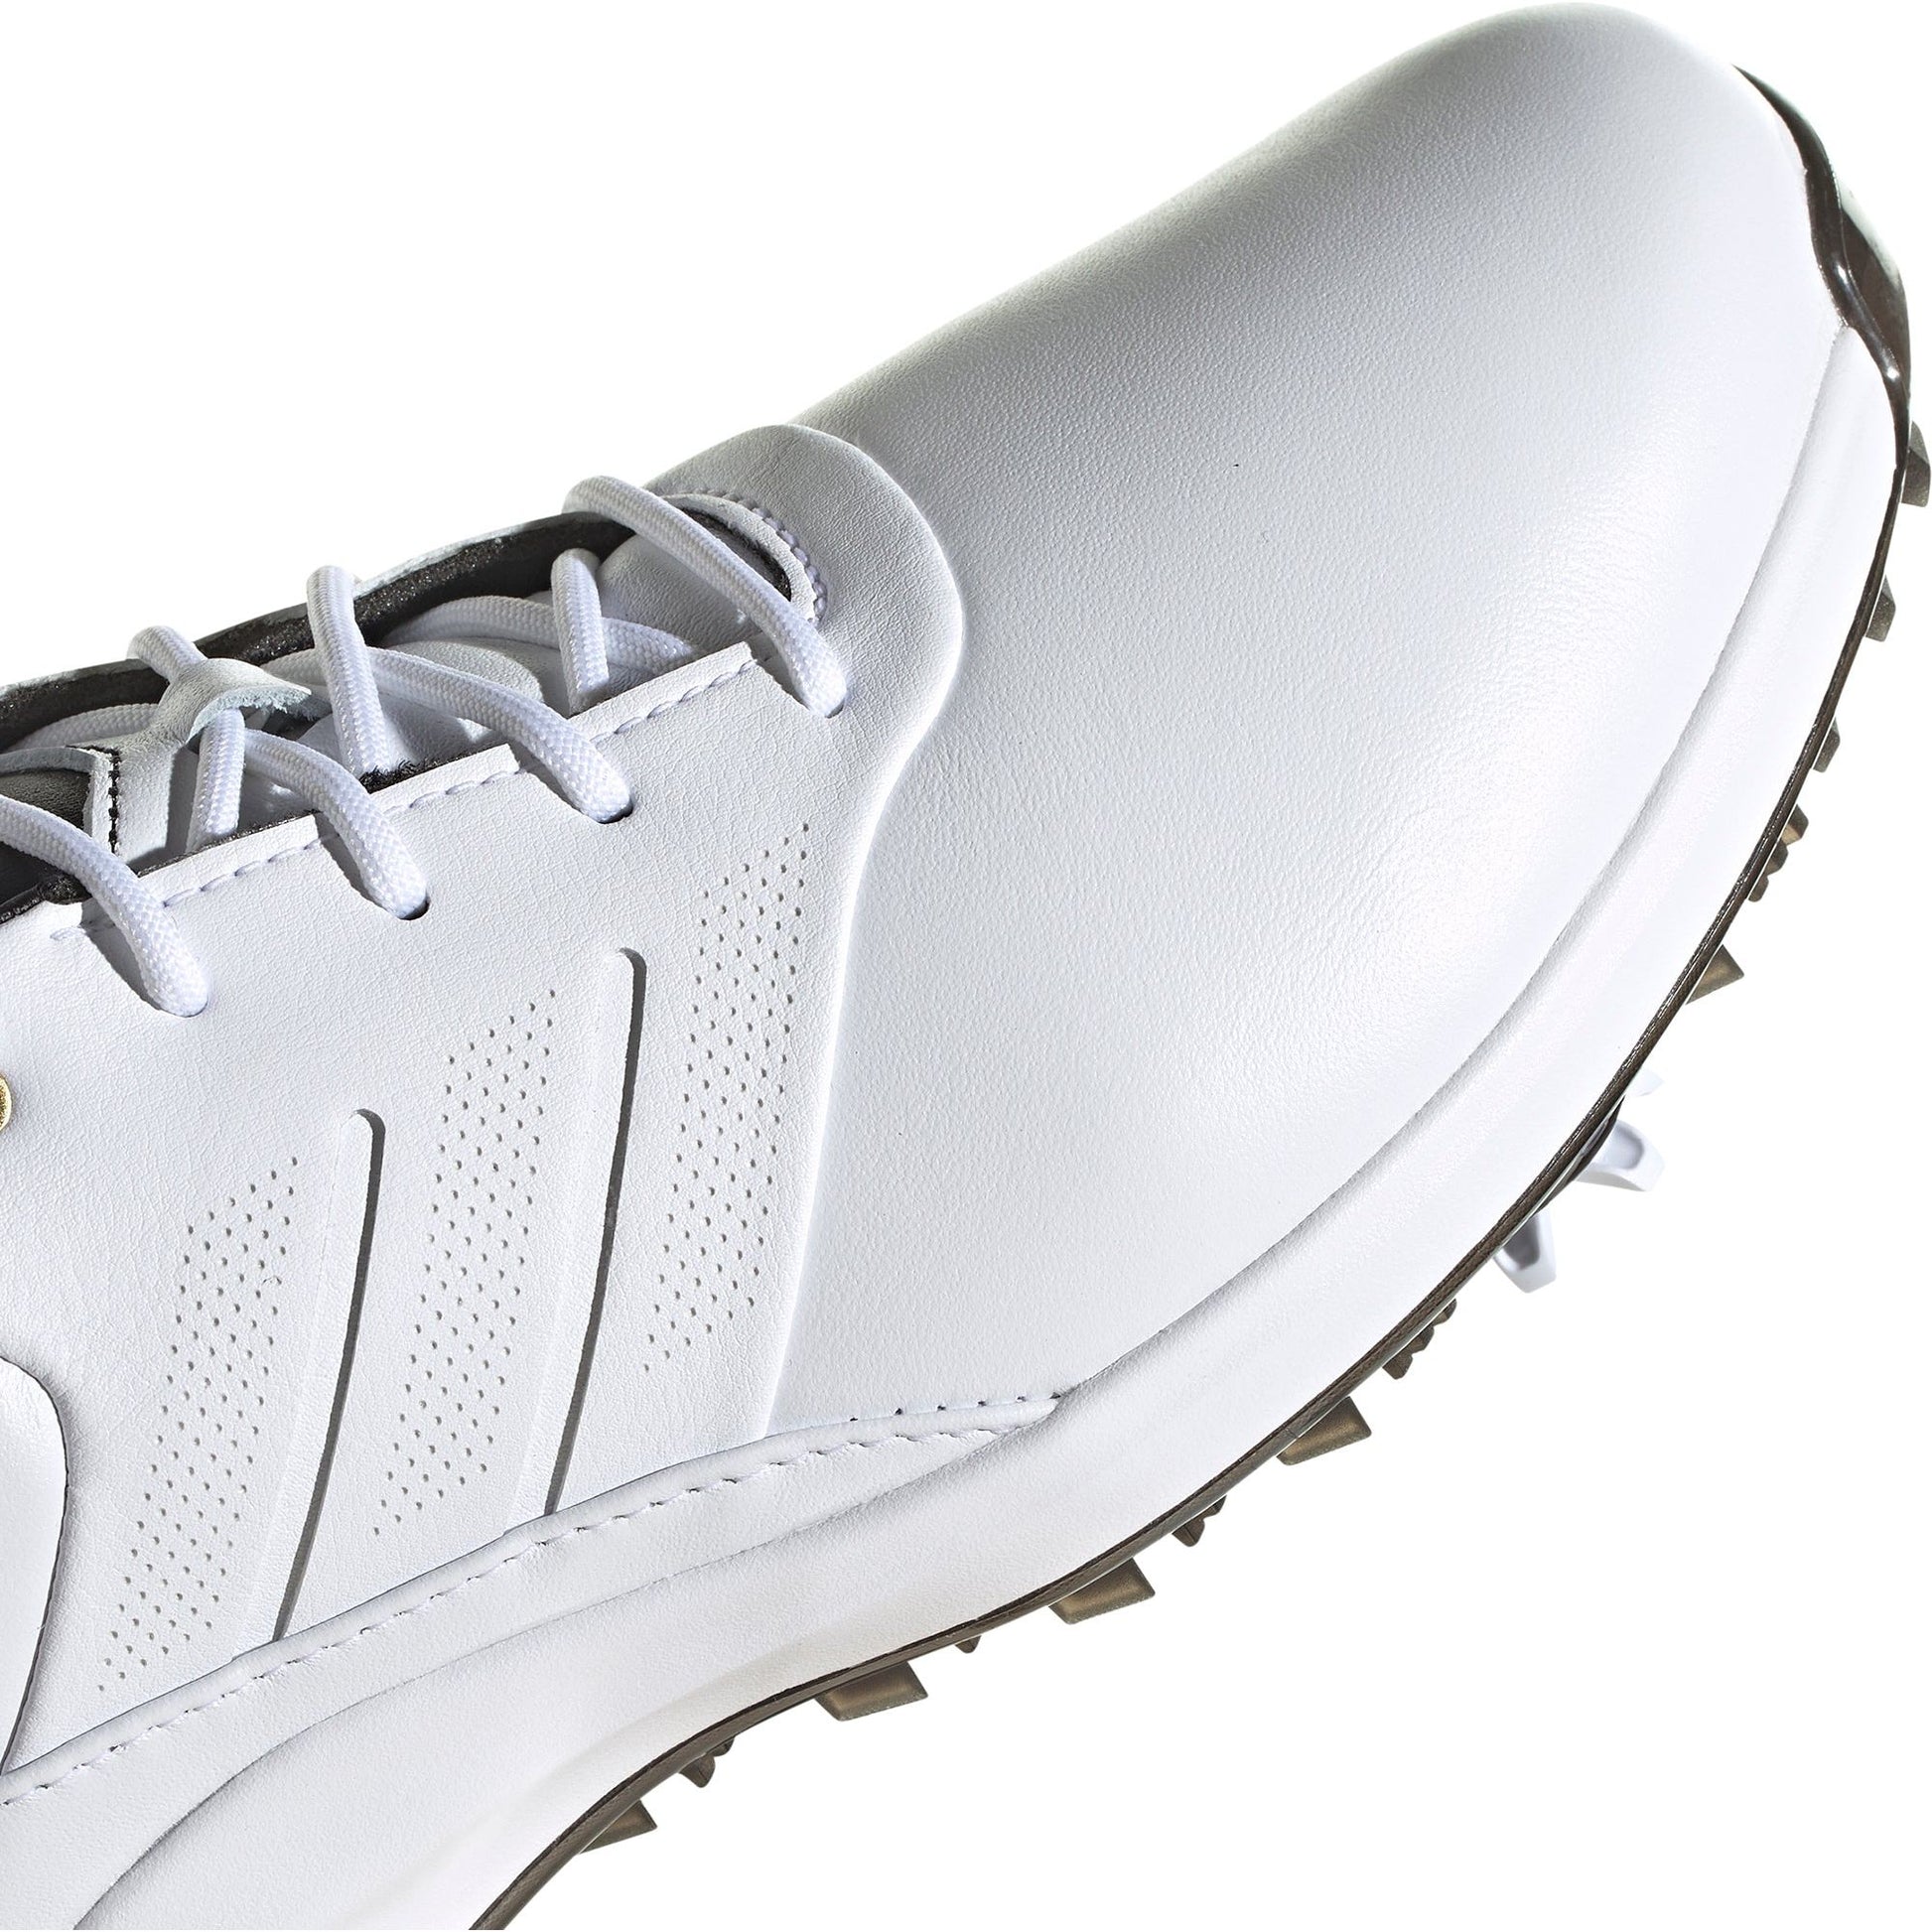 Adidas Performance Classic Golf Shoes Fw6273 Details